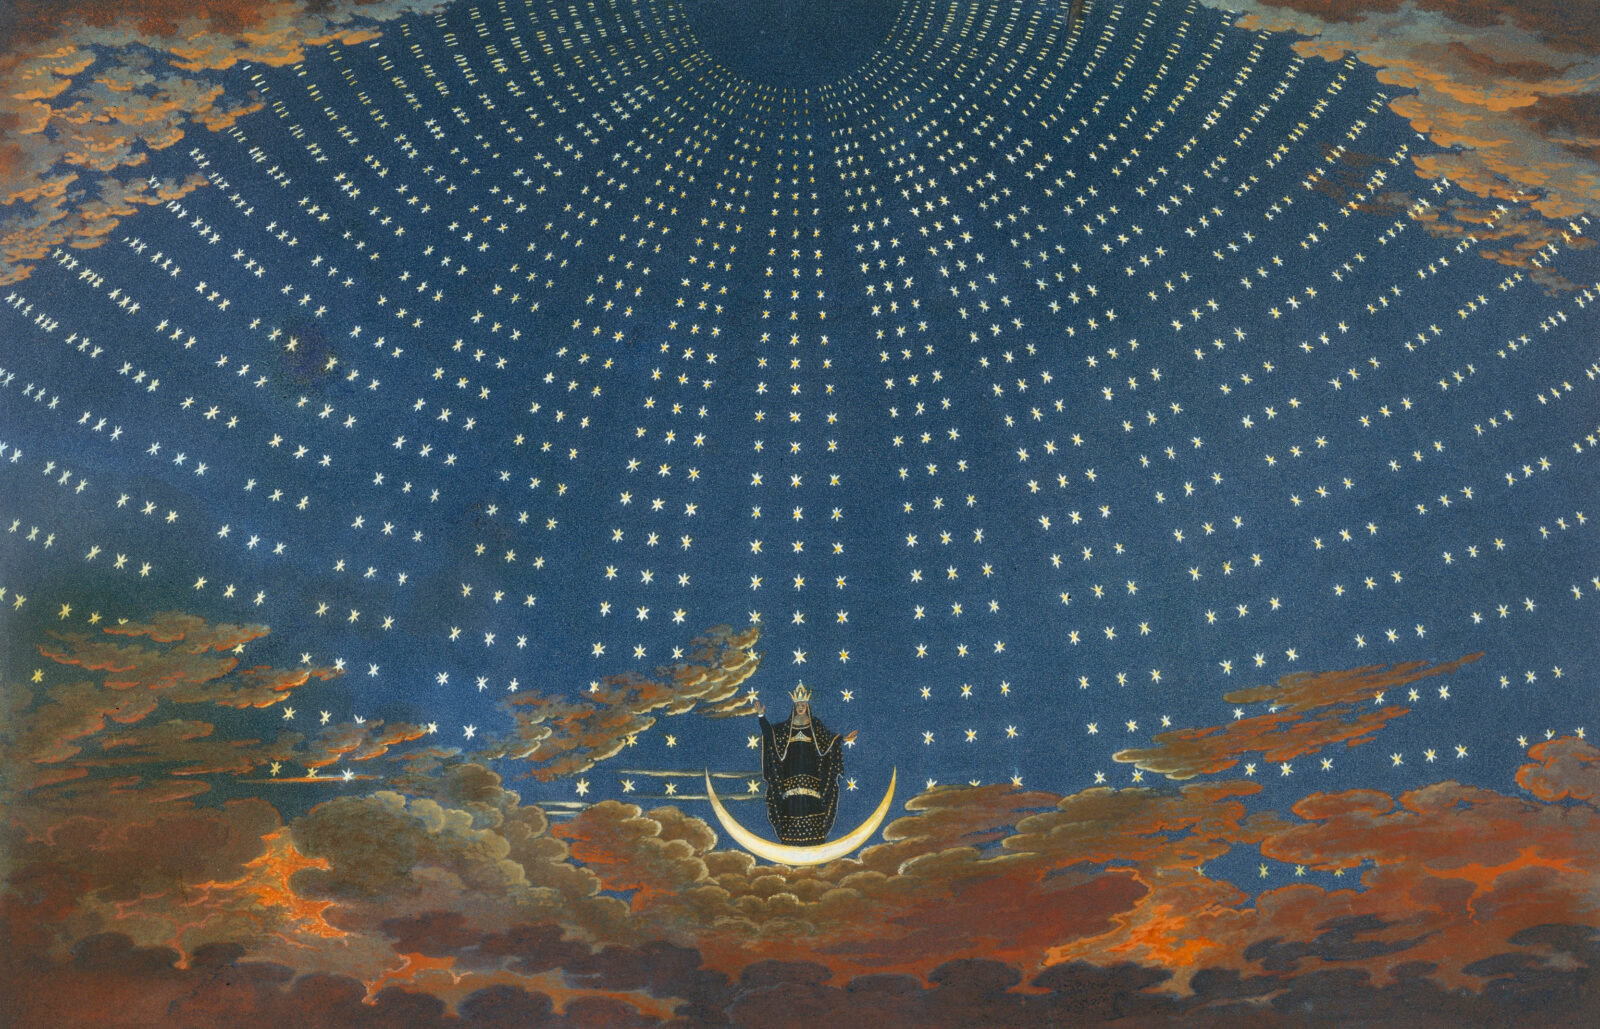 Karl Friedrich Thiele - Design for The Magic Flute: The Hall of Stars in the Palace of the Queen of the Night, Act 1, Scene 6.